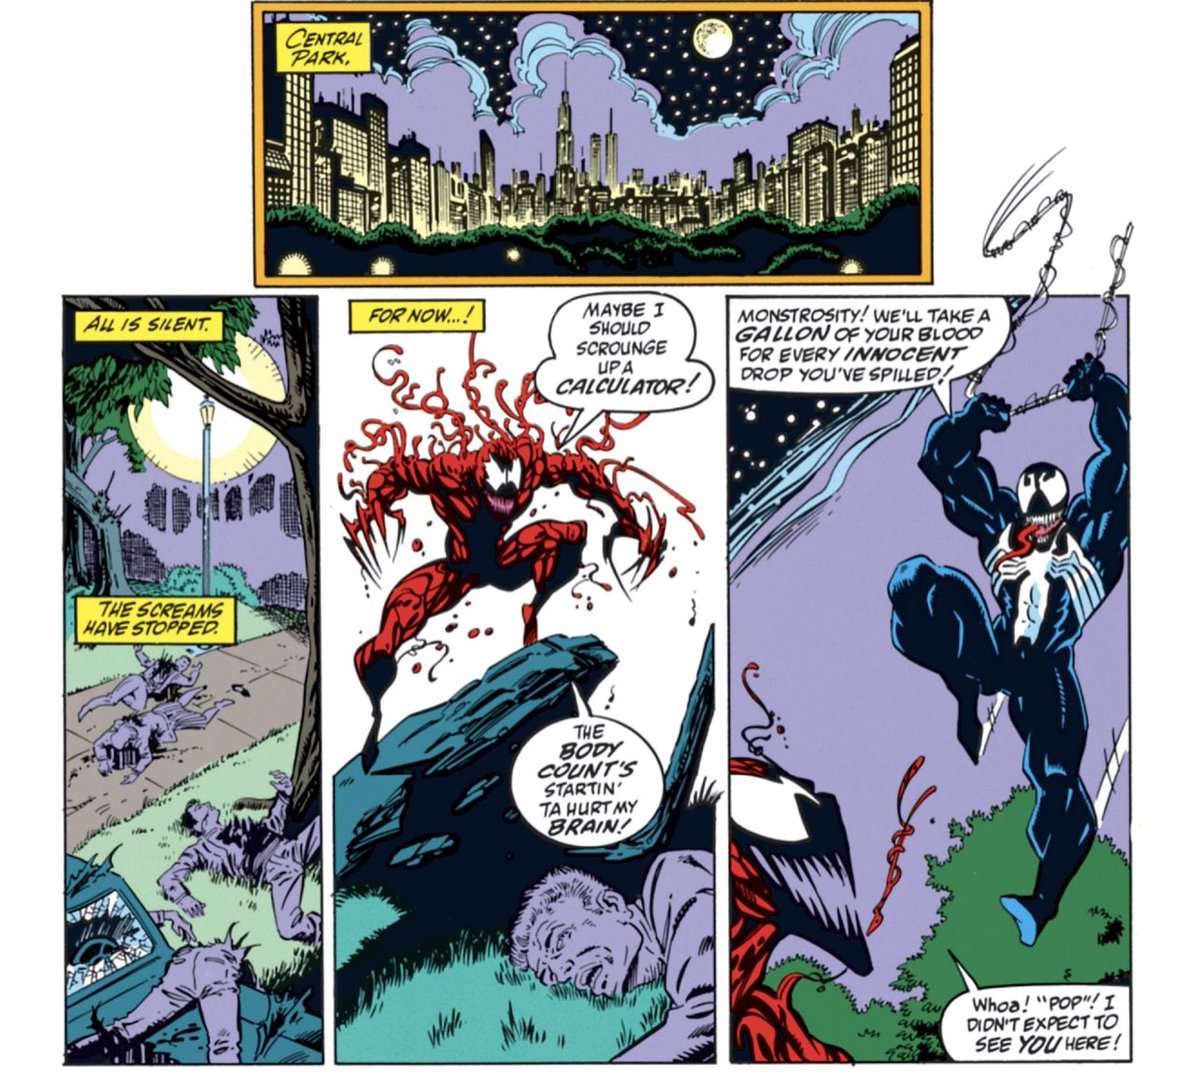 RT @thevenomsite: The battle starts tonight!

From: The Amazing Spider-Man #378 (1993) https://t.co/BZ3NwhXOTw